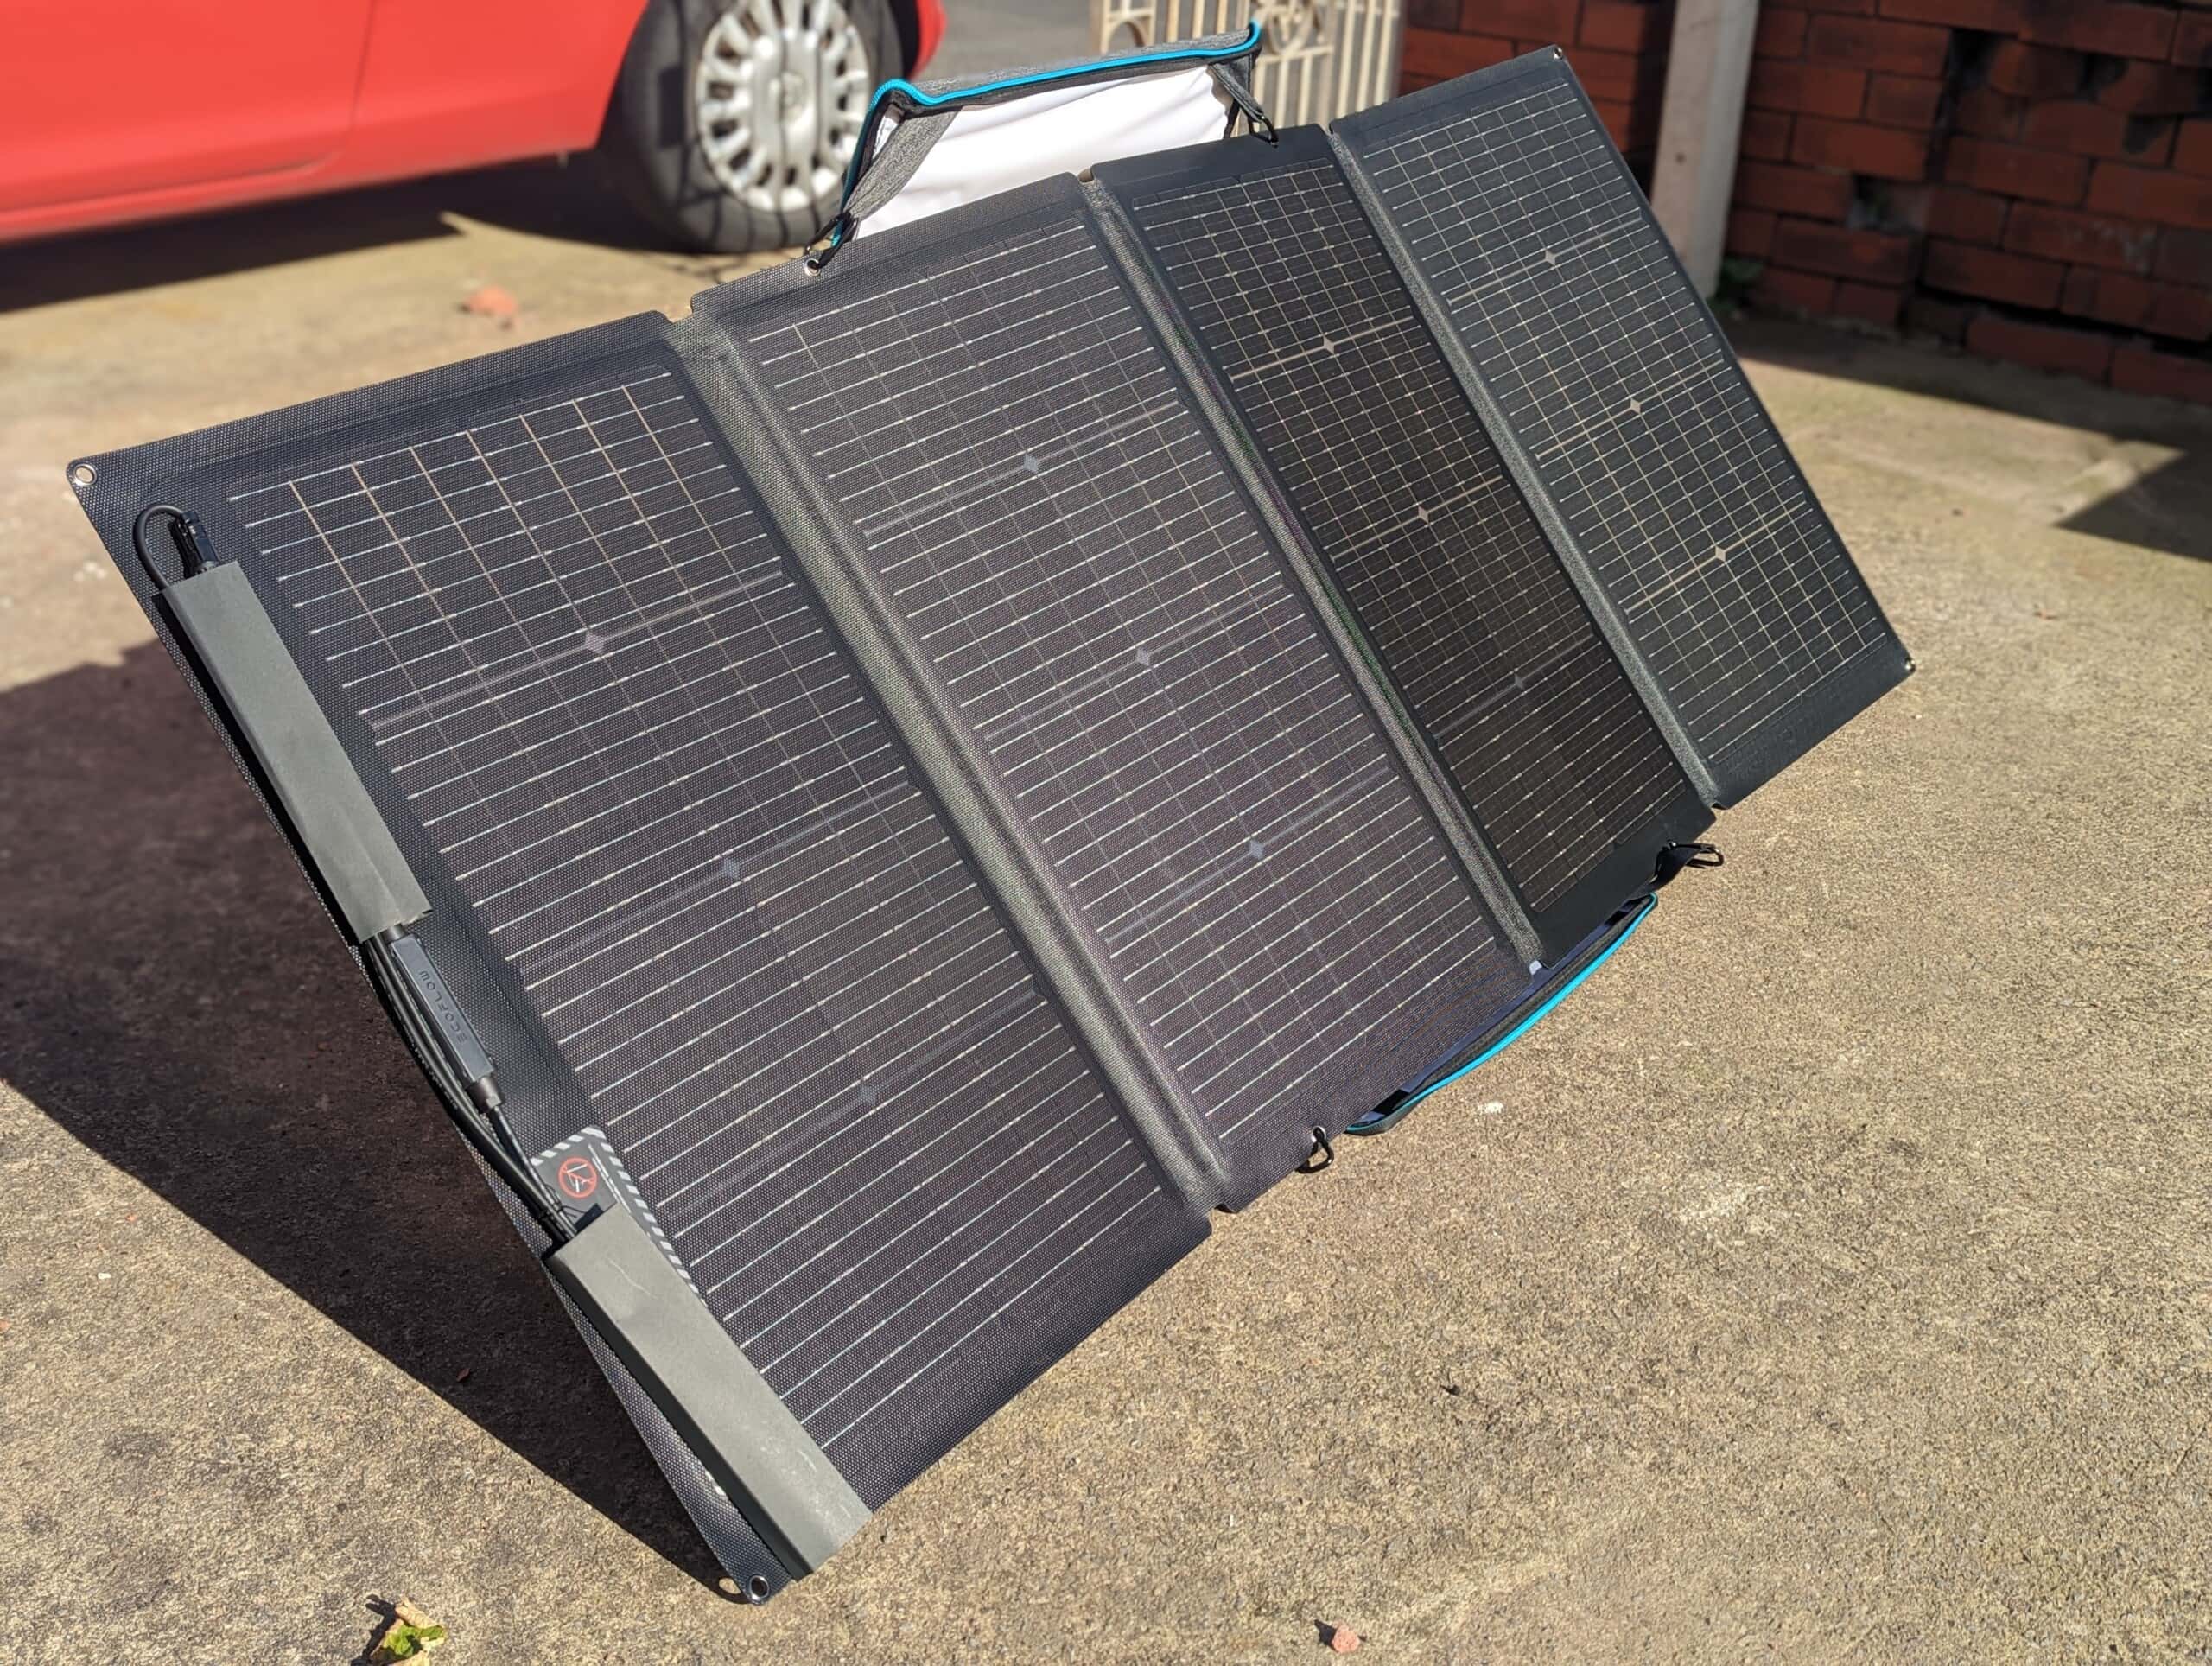 EcoFlow 220W Bifacial Solar Panel Review – The perfect solar panel for the EcoFlow RIVER 2